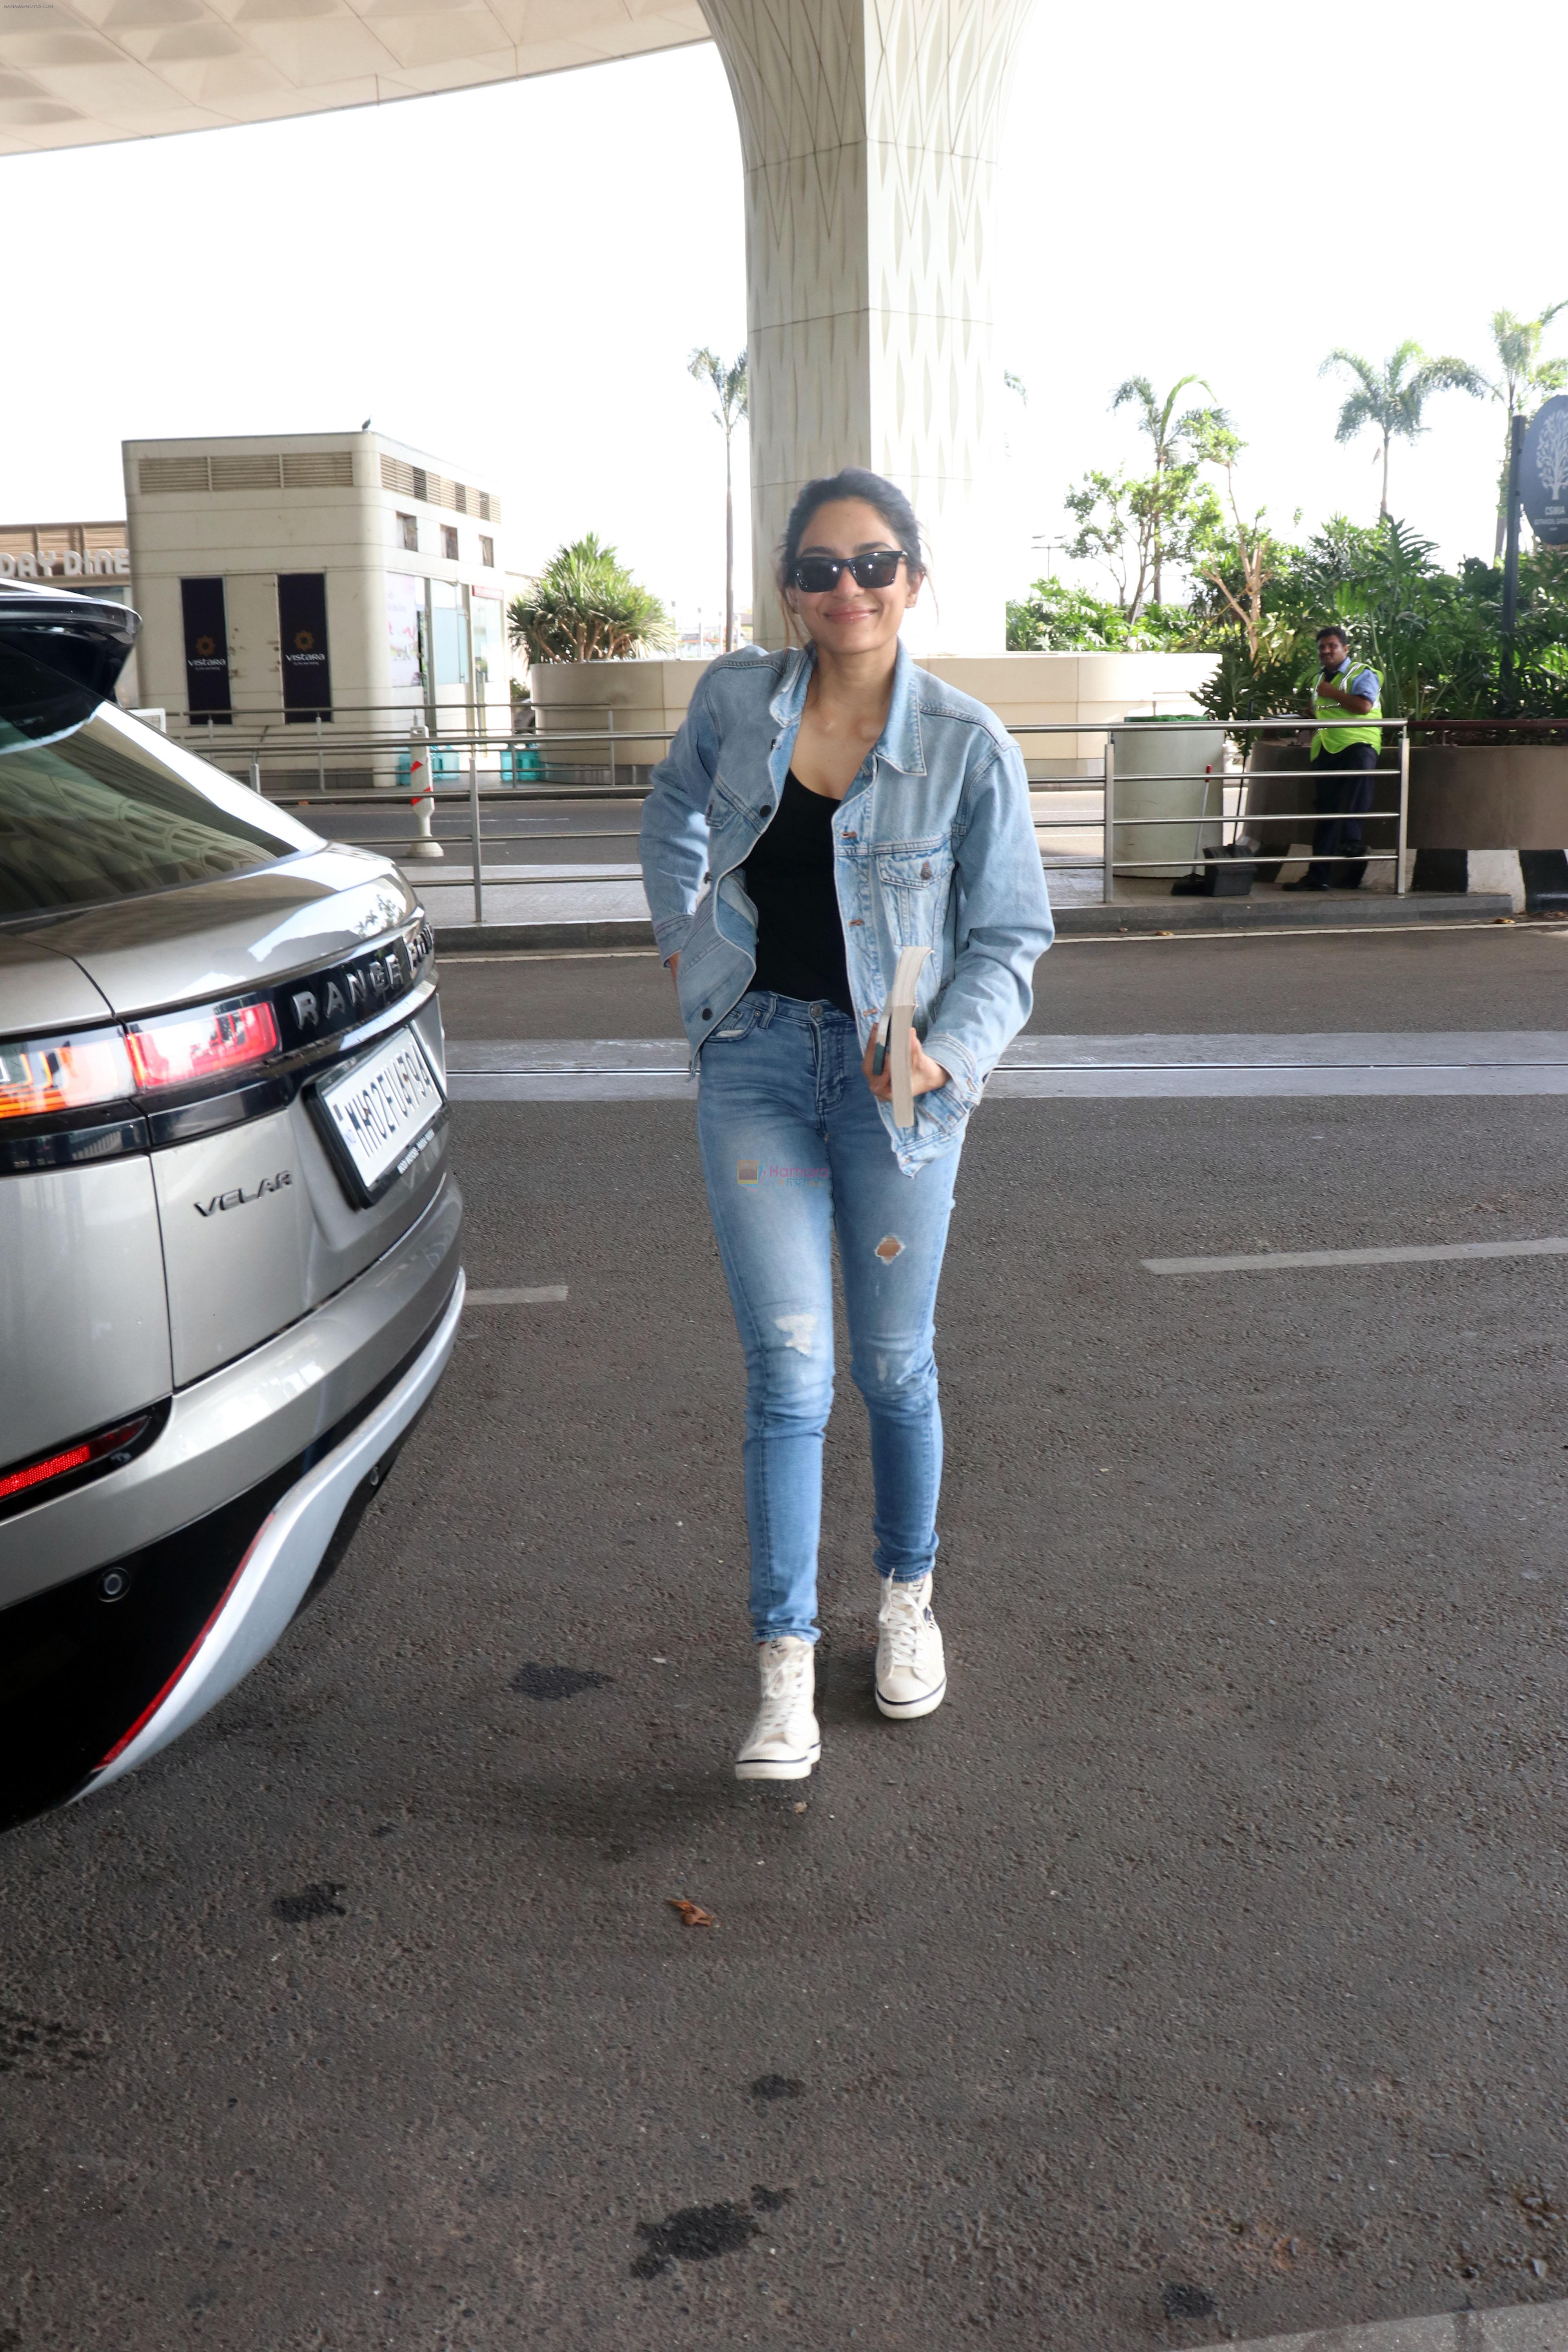 Sobhita Dhulipala dressed in Jeans top and pants wearing sunglasses holding Atmoic Habits by James Clear